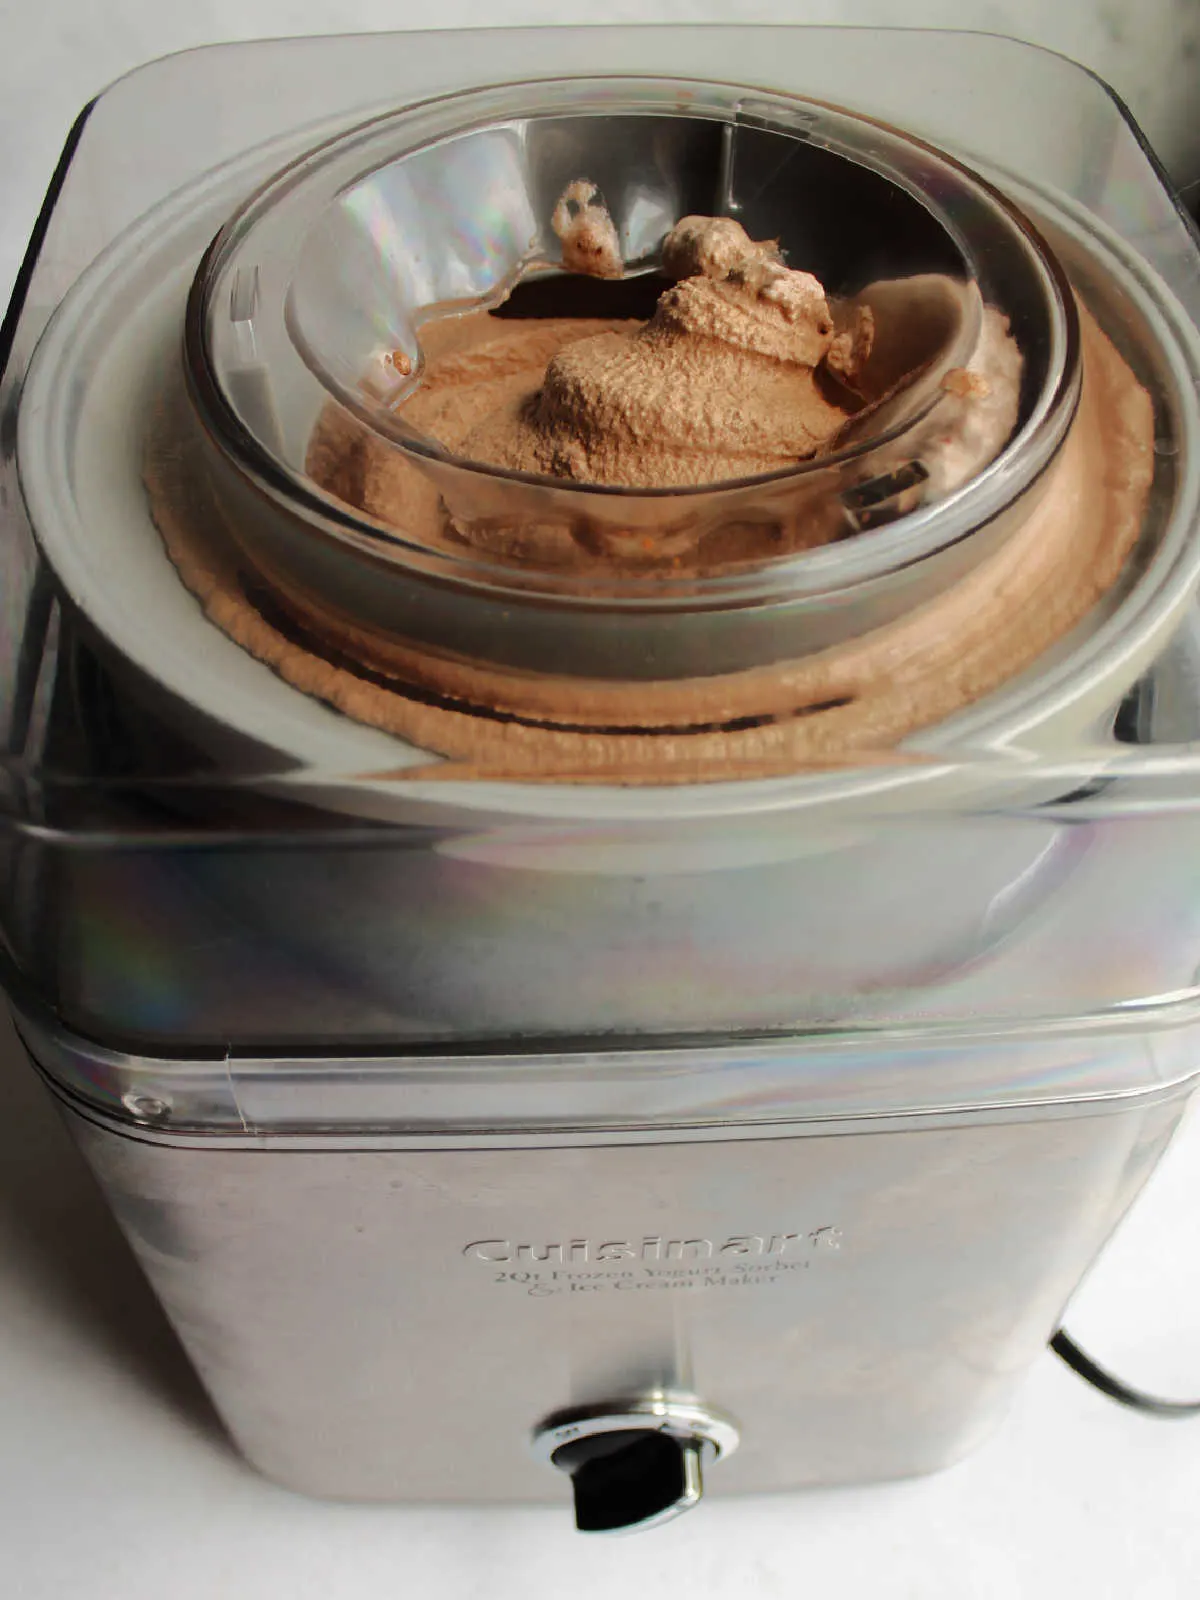 Chocolate ice cream in ice cream maker, ready to go into containers.